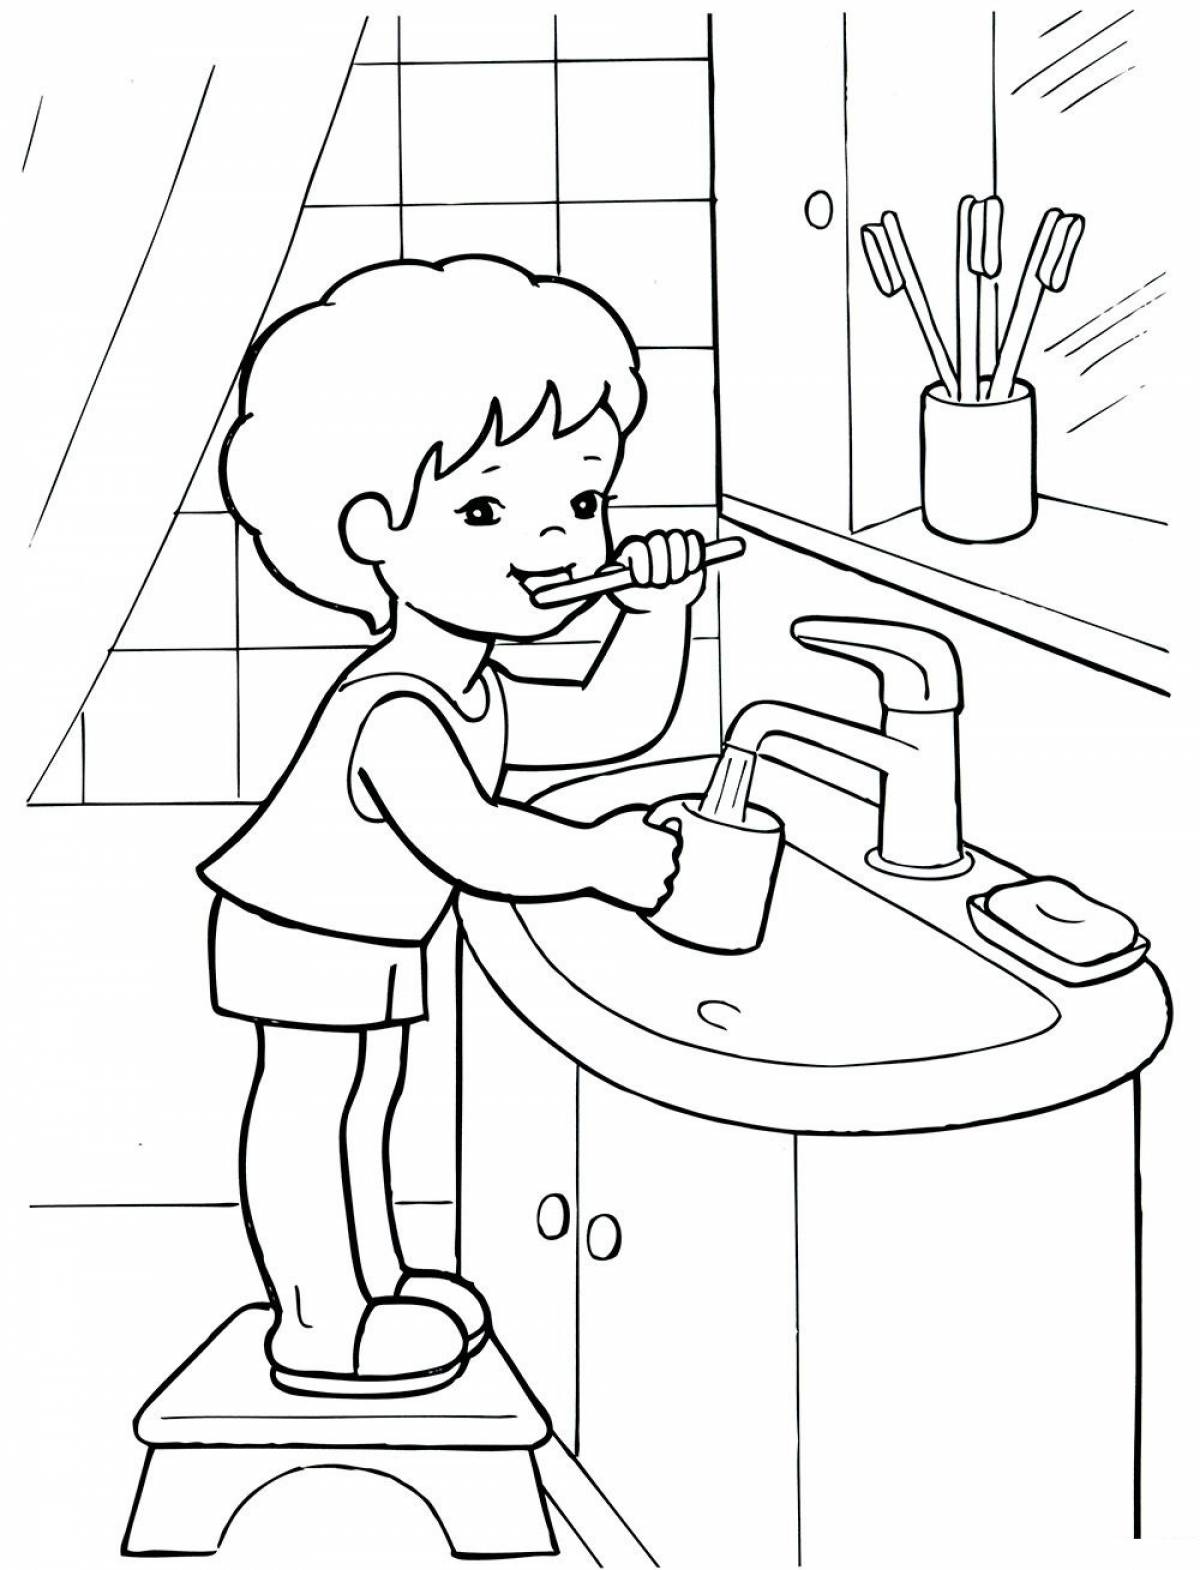 Health coloring page